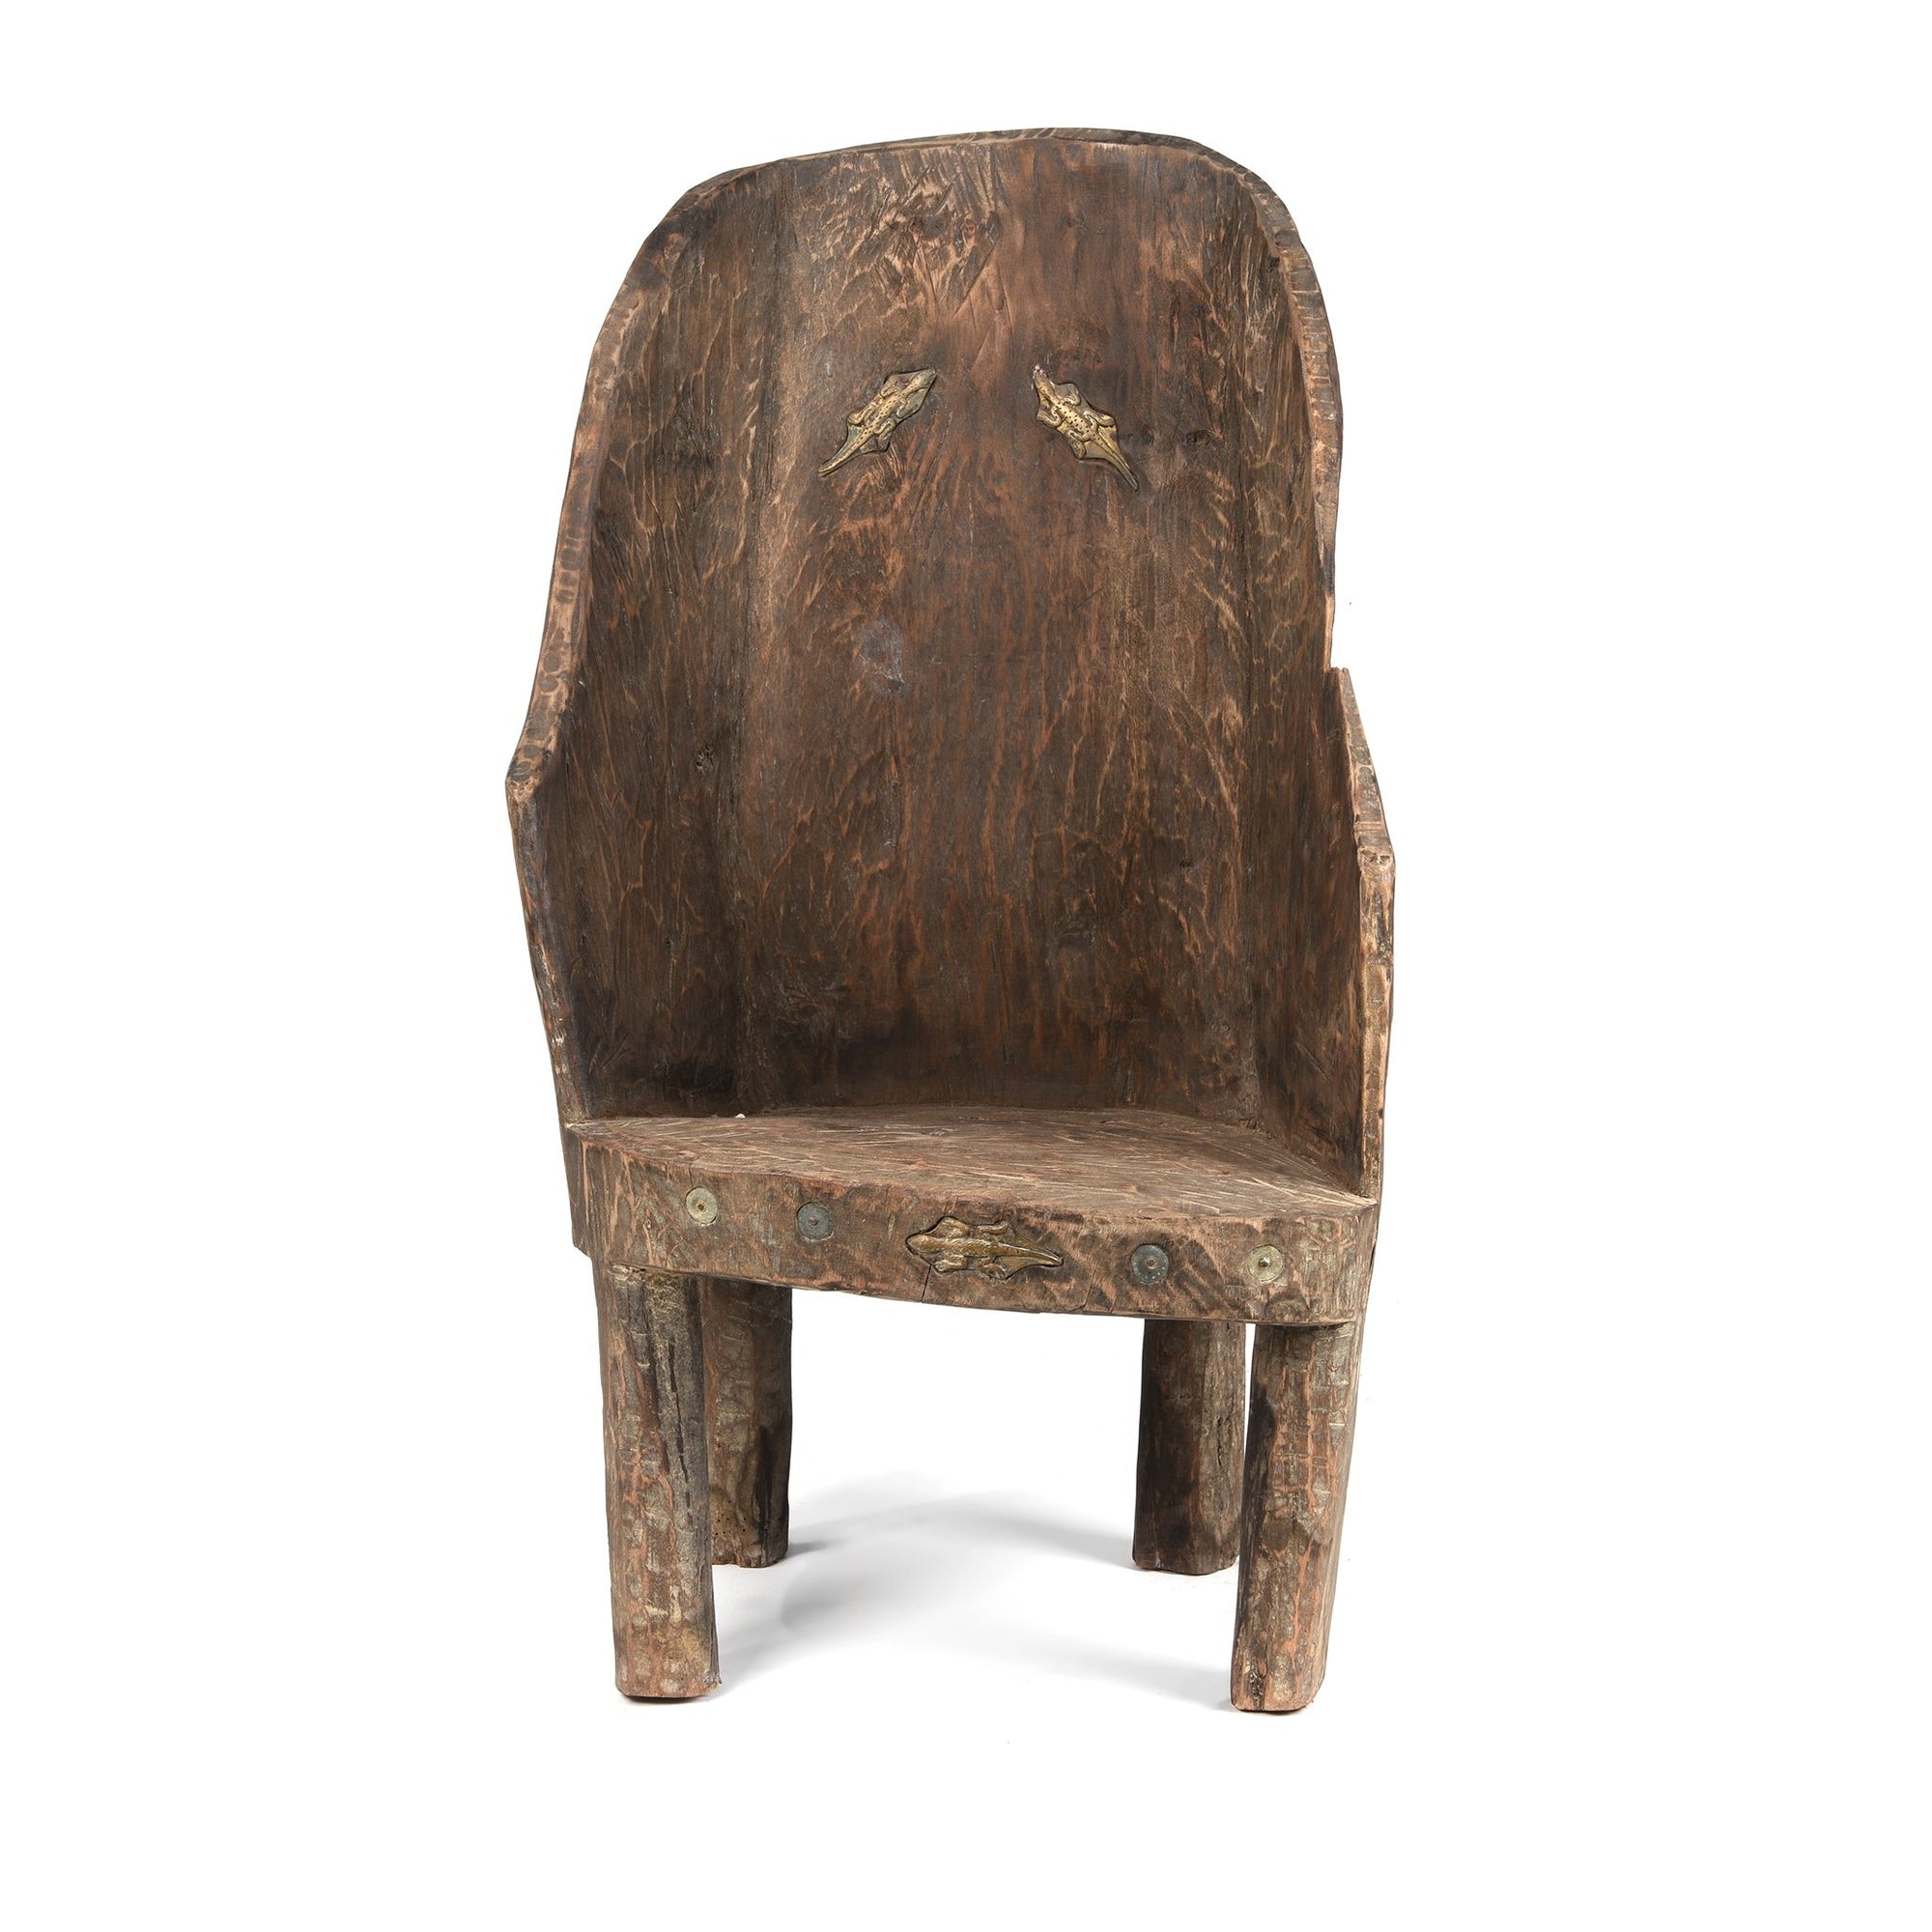 Carved Chair From The Naga Tribe -  Circa 80 Yrs Old - 54 x 41 x 96 (wxdxh cms) - A6211V3